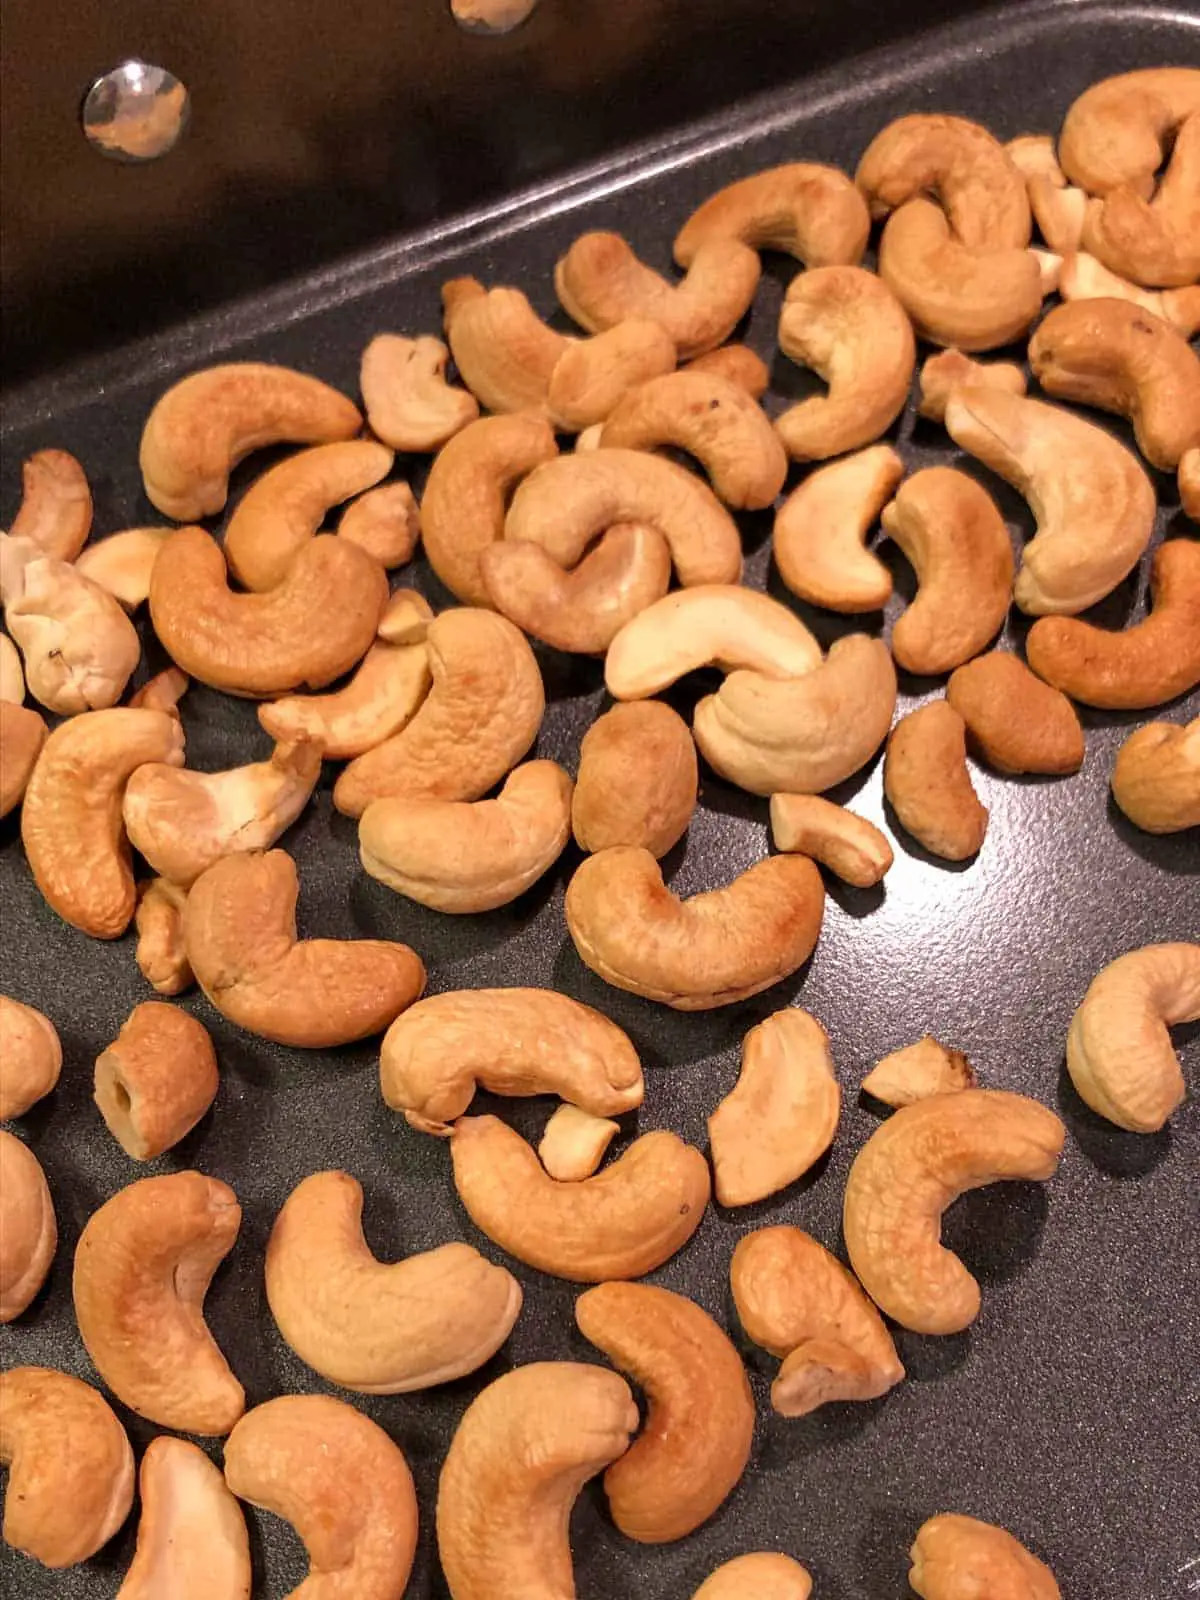 Roasted cashews in a roasting tray.